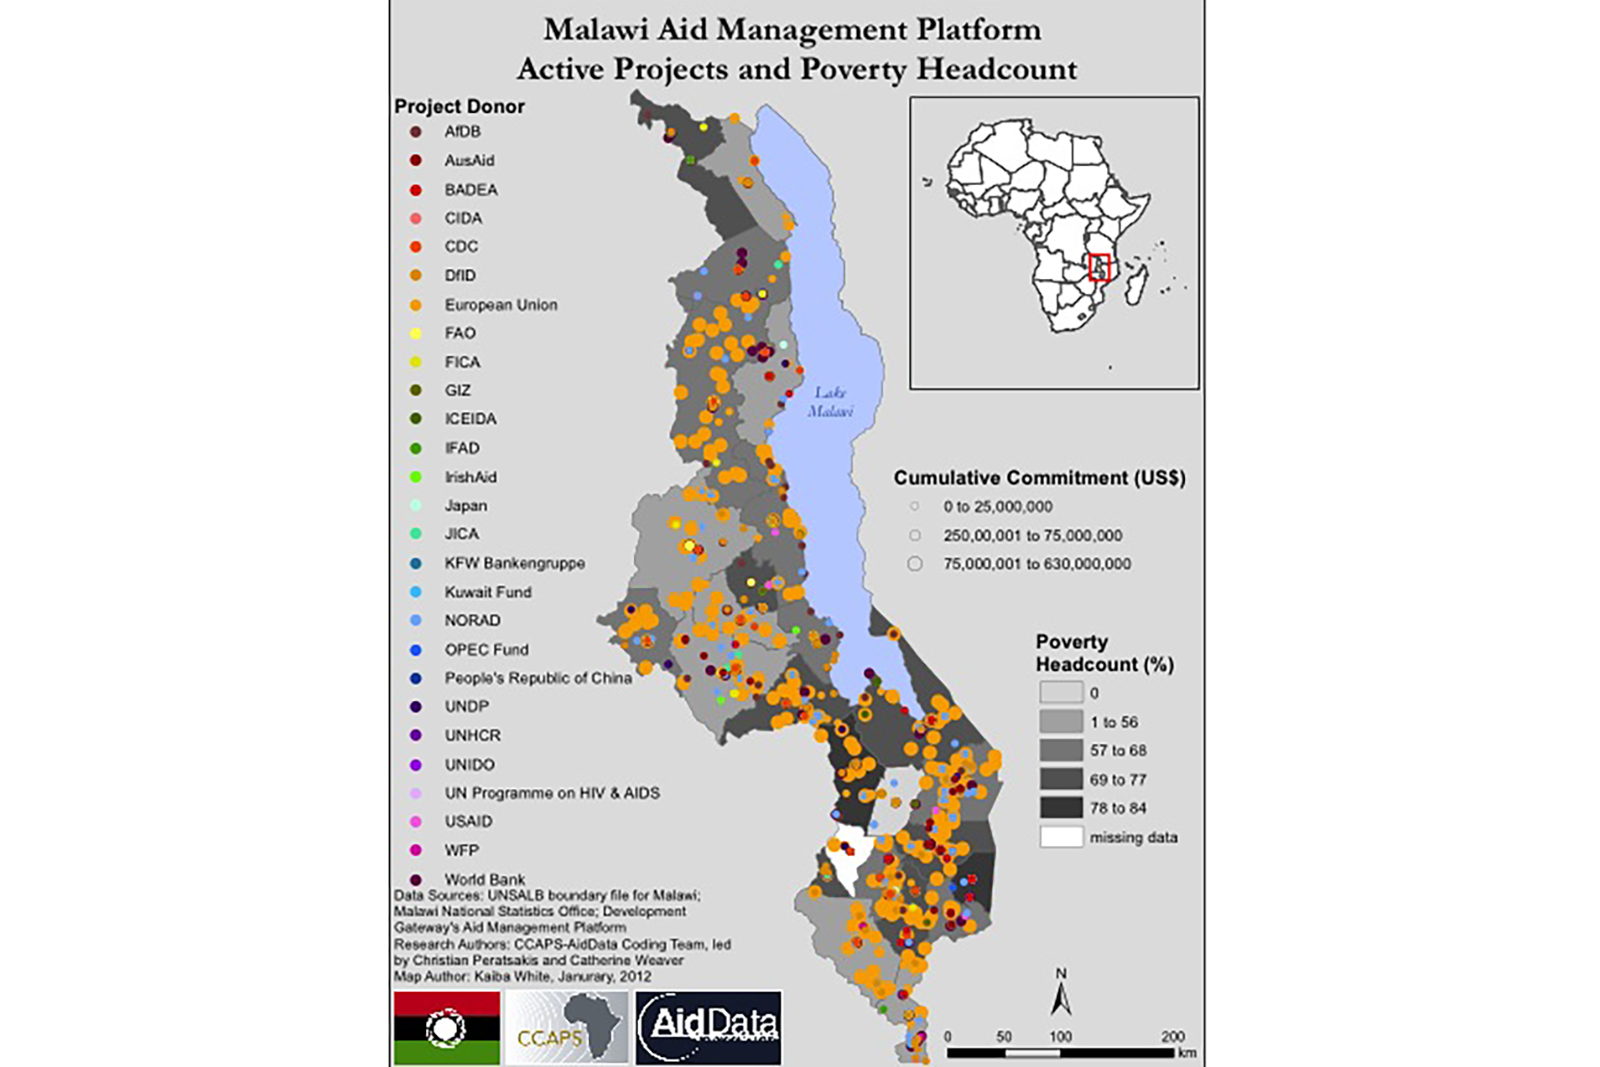 Map of Malawi with locations of aid organizations